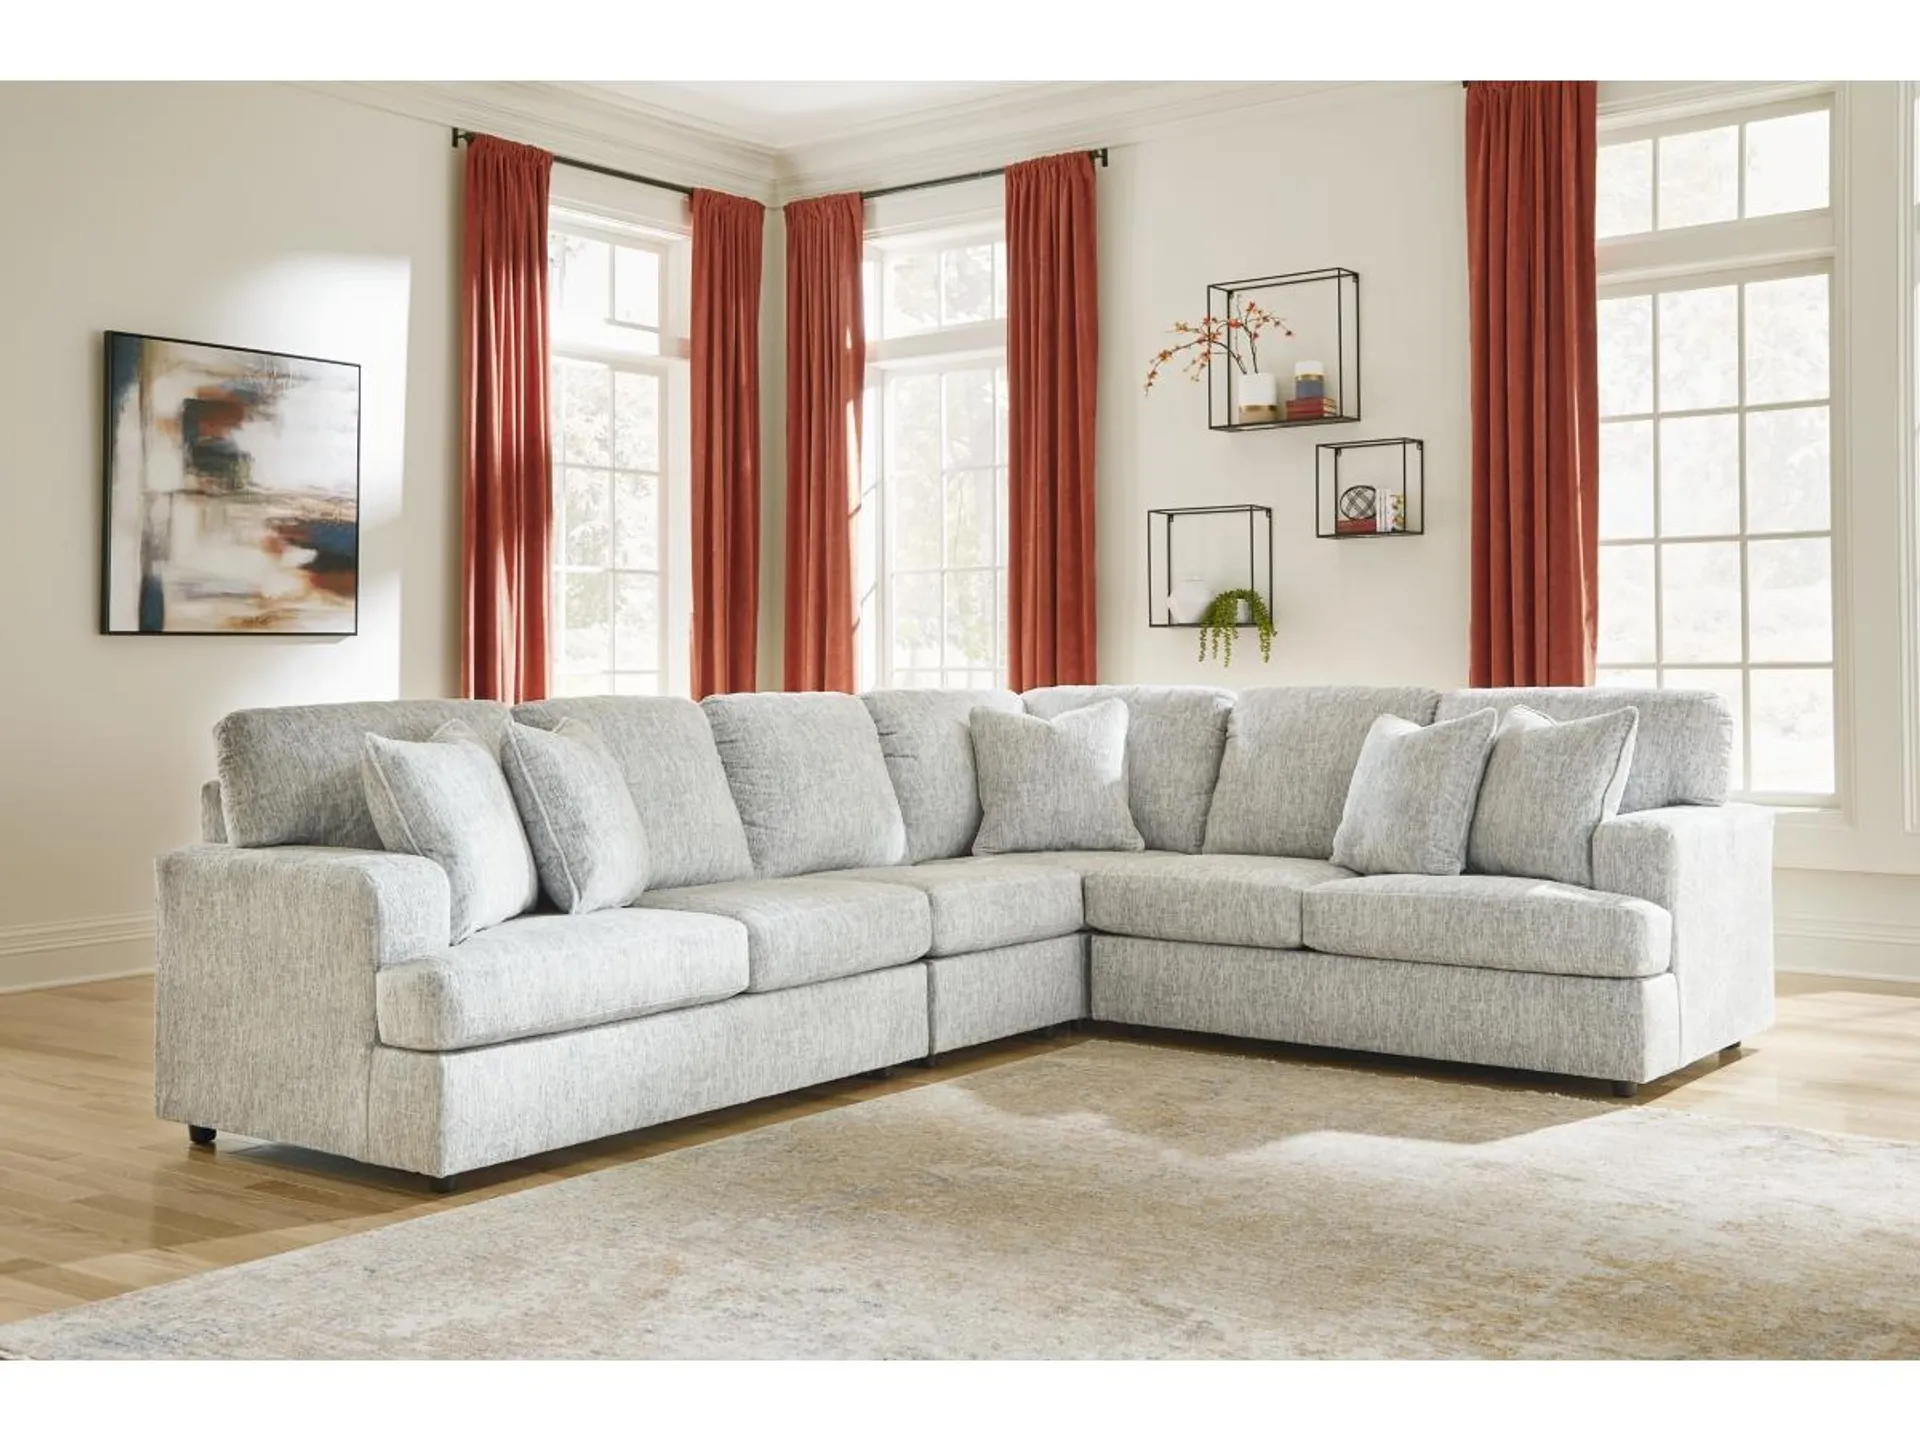 Playwrite 4-Piece Sectional